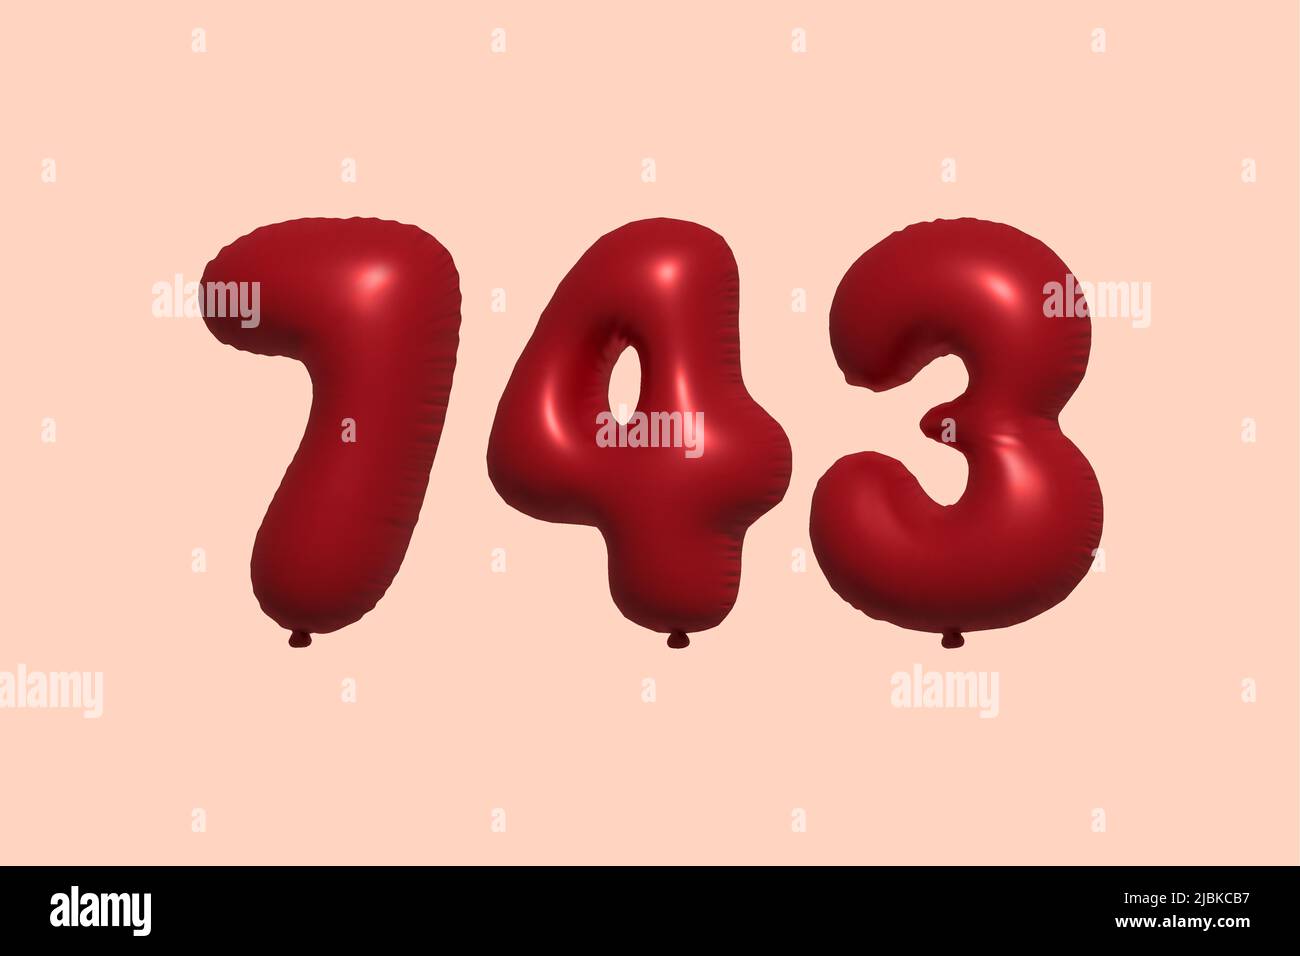 743 3d number balloon made of realistic metallic air balloon 3d rendering. 3D Red helium balloons for sale decoration Party Birthday, Celebrate anniversary, Wedding Holiday. Vector illustration Stock Vector